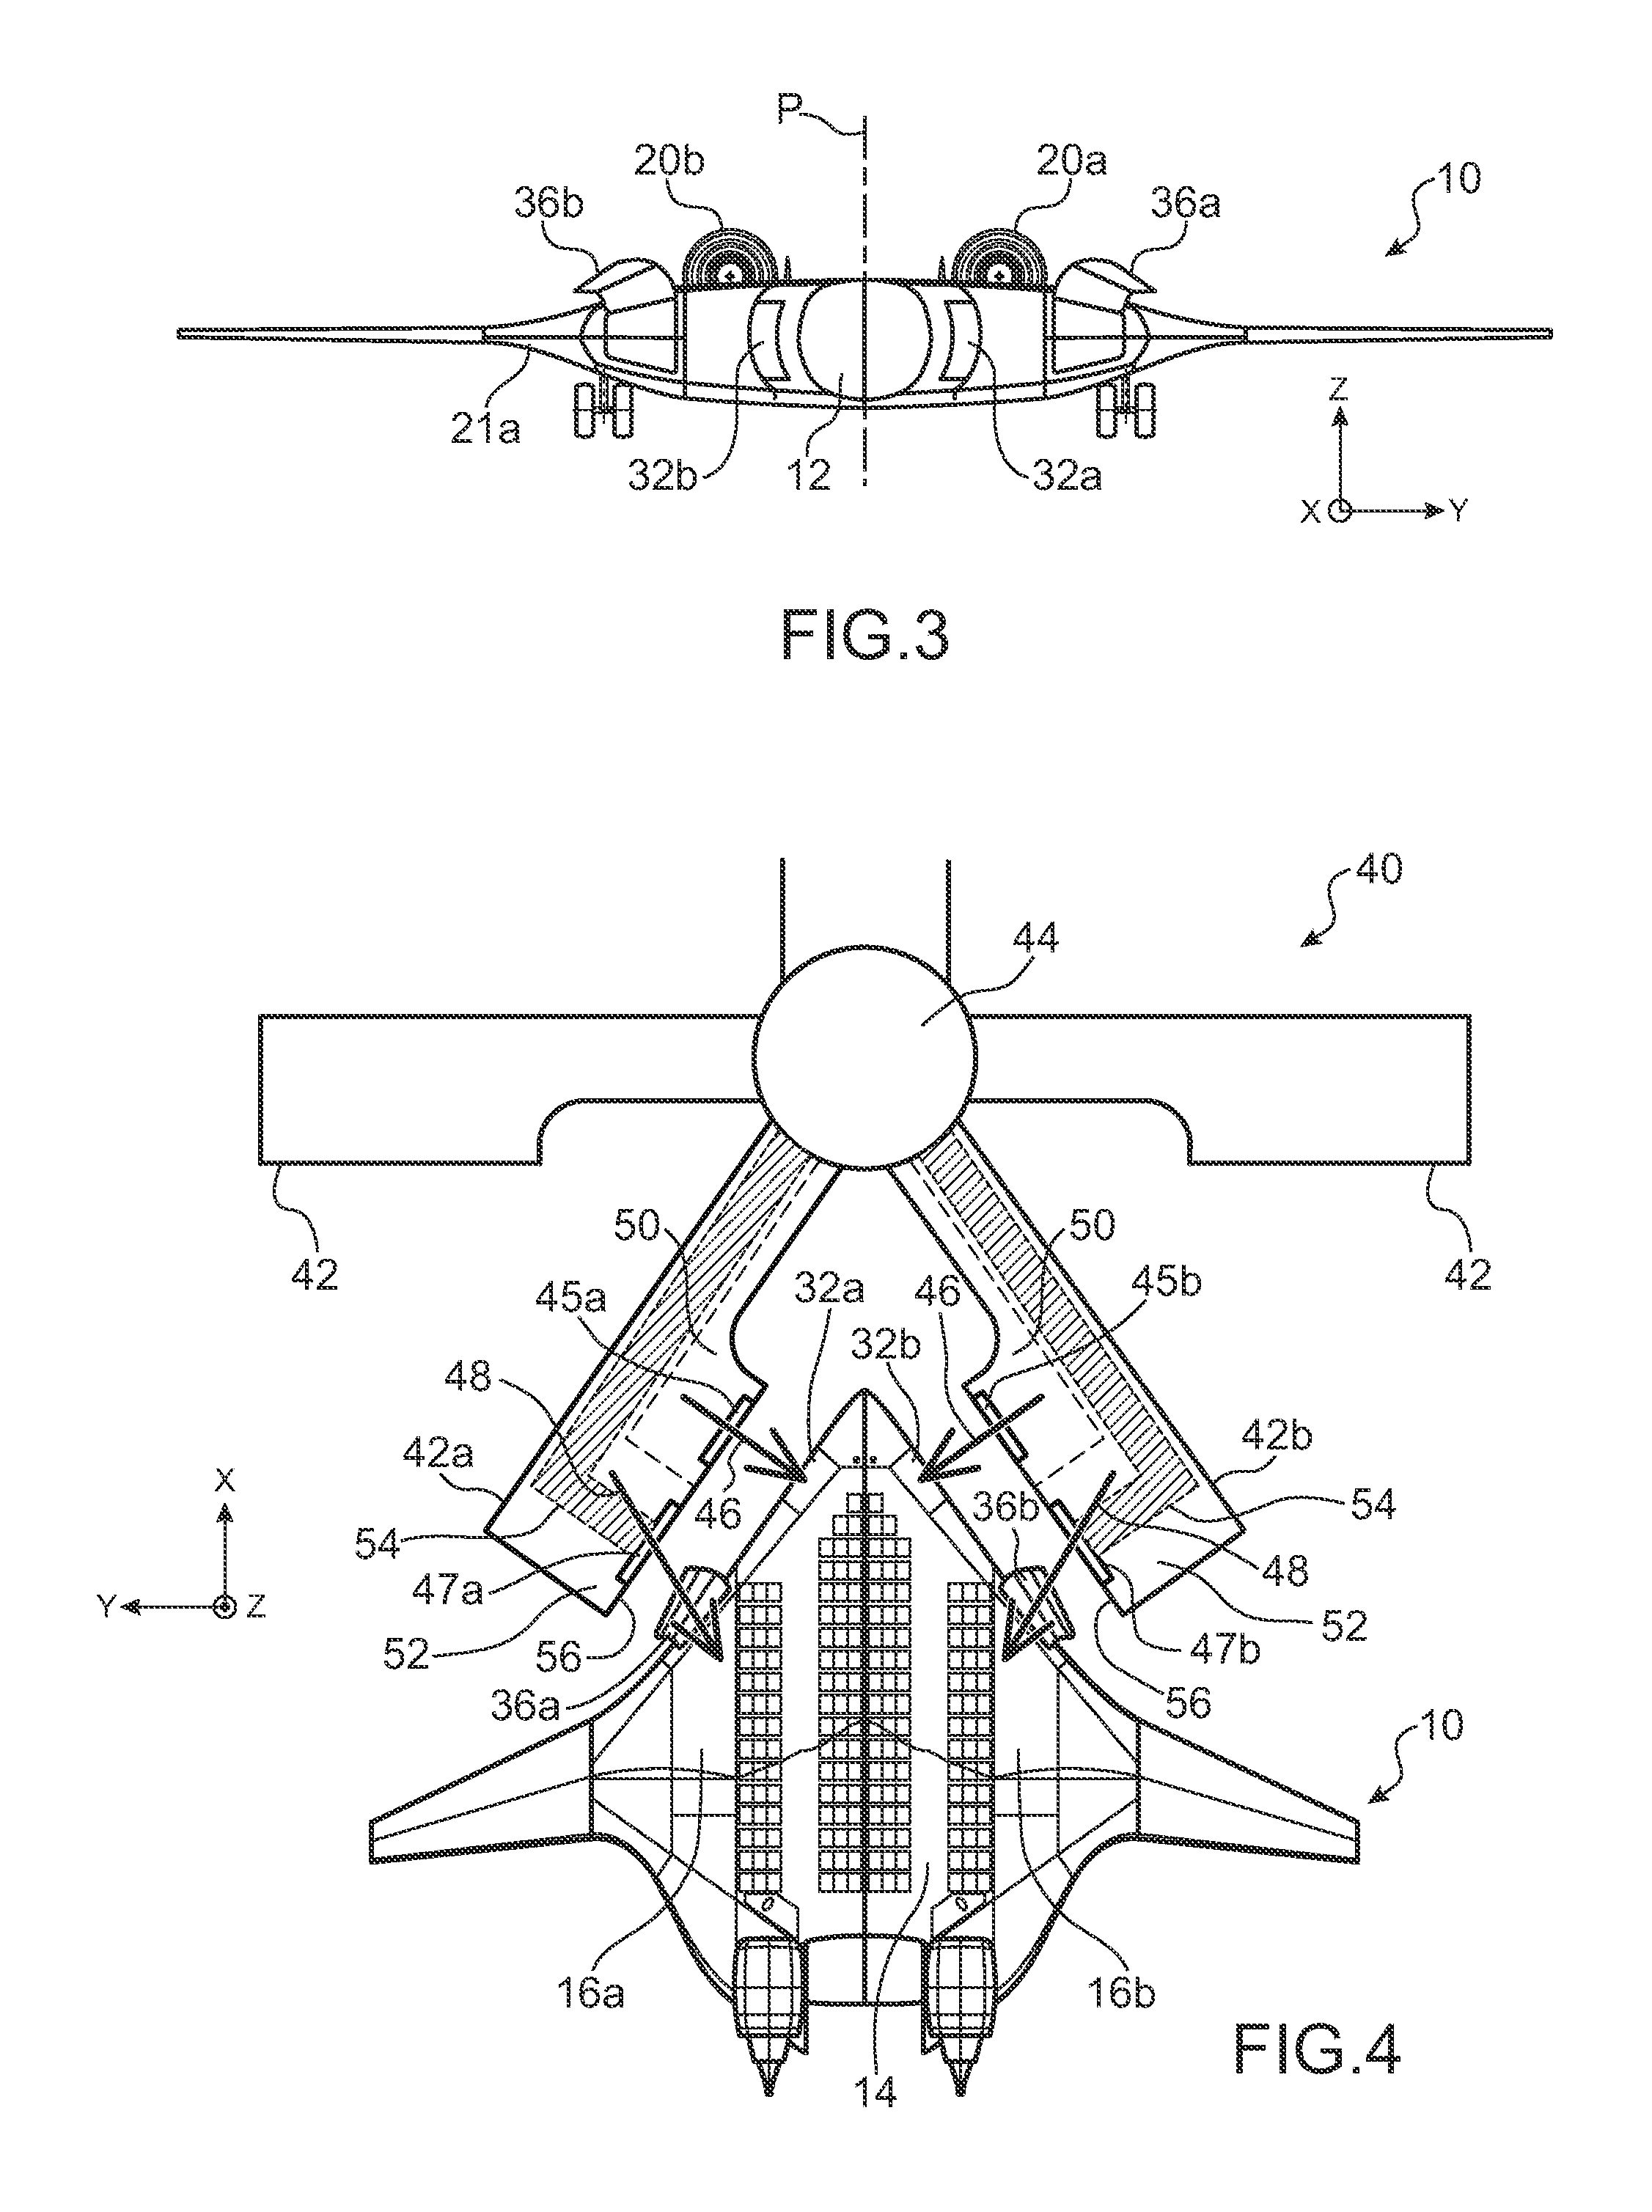 Flying wing with side cargo compartment